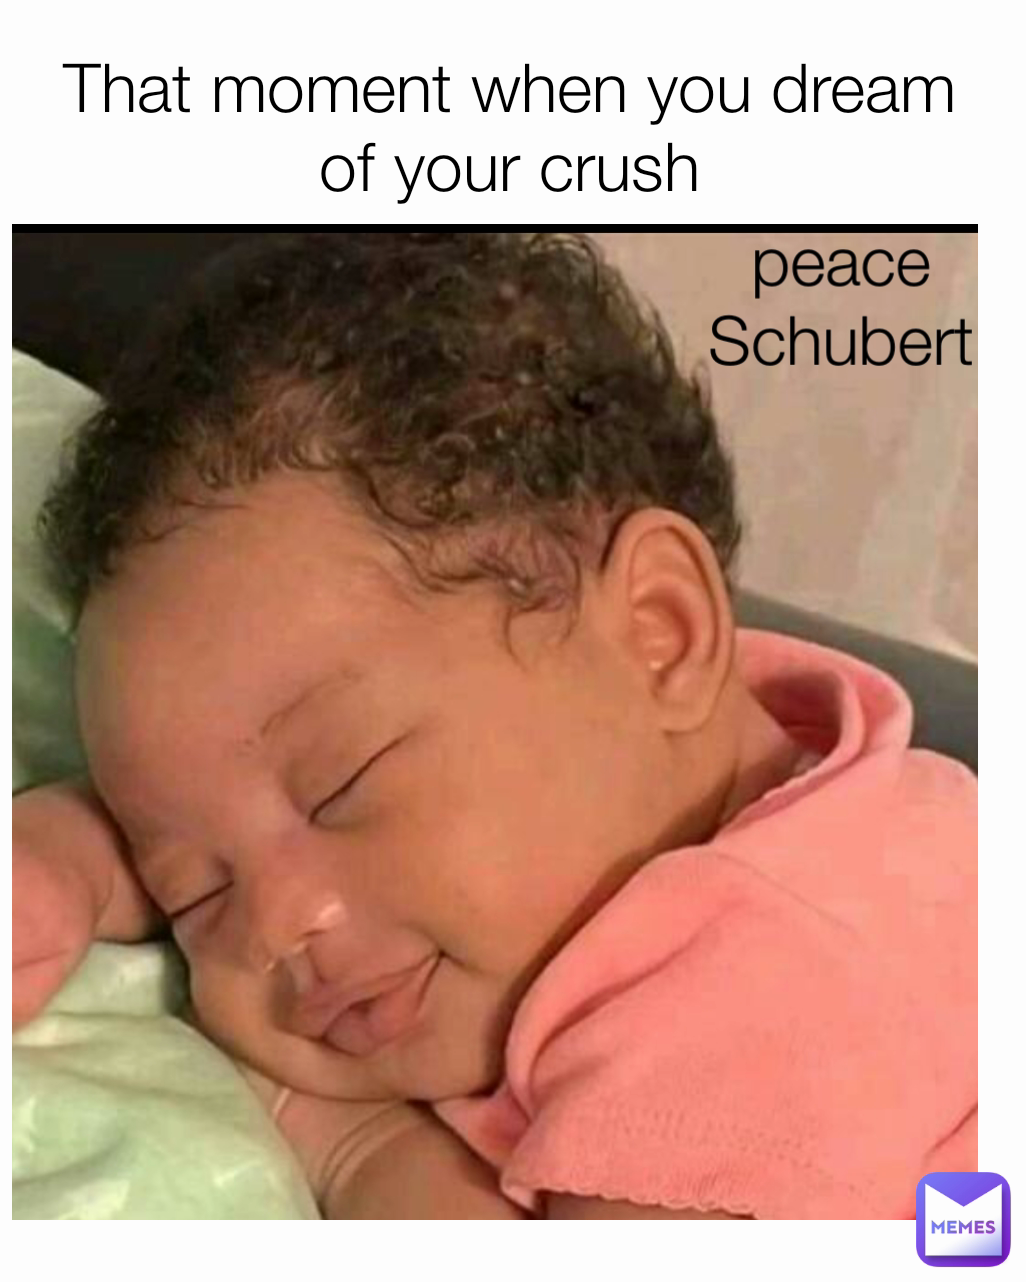 That moment when you dream of your crush peace Schubert